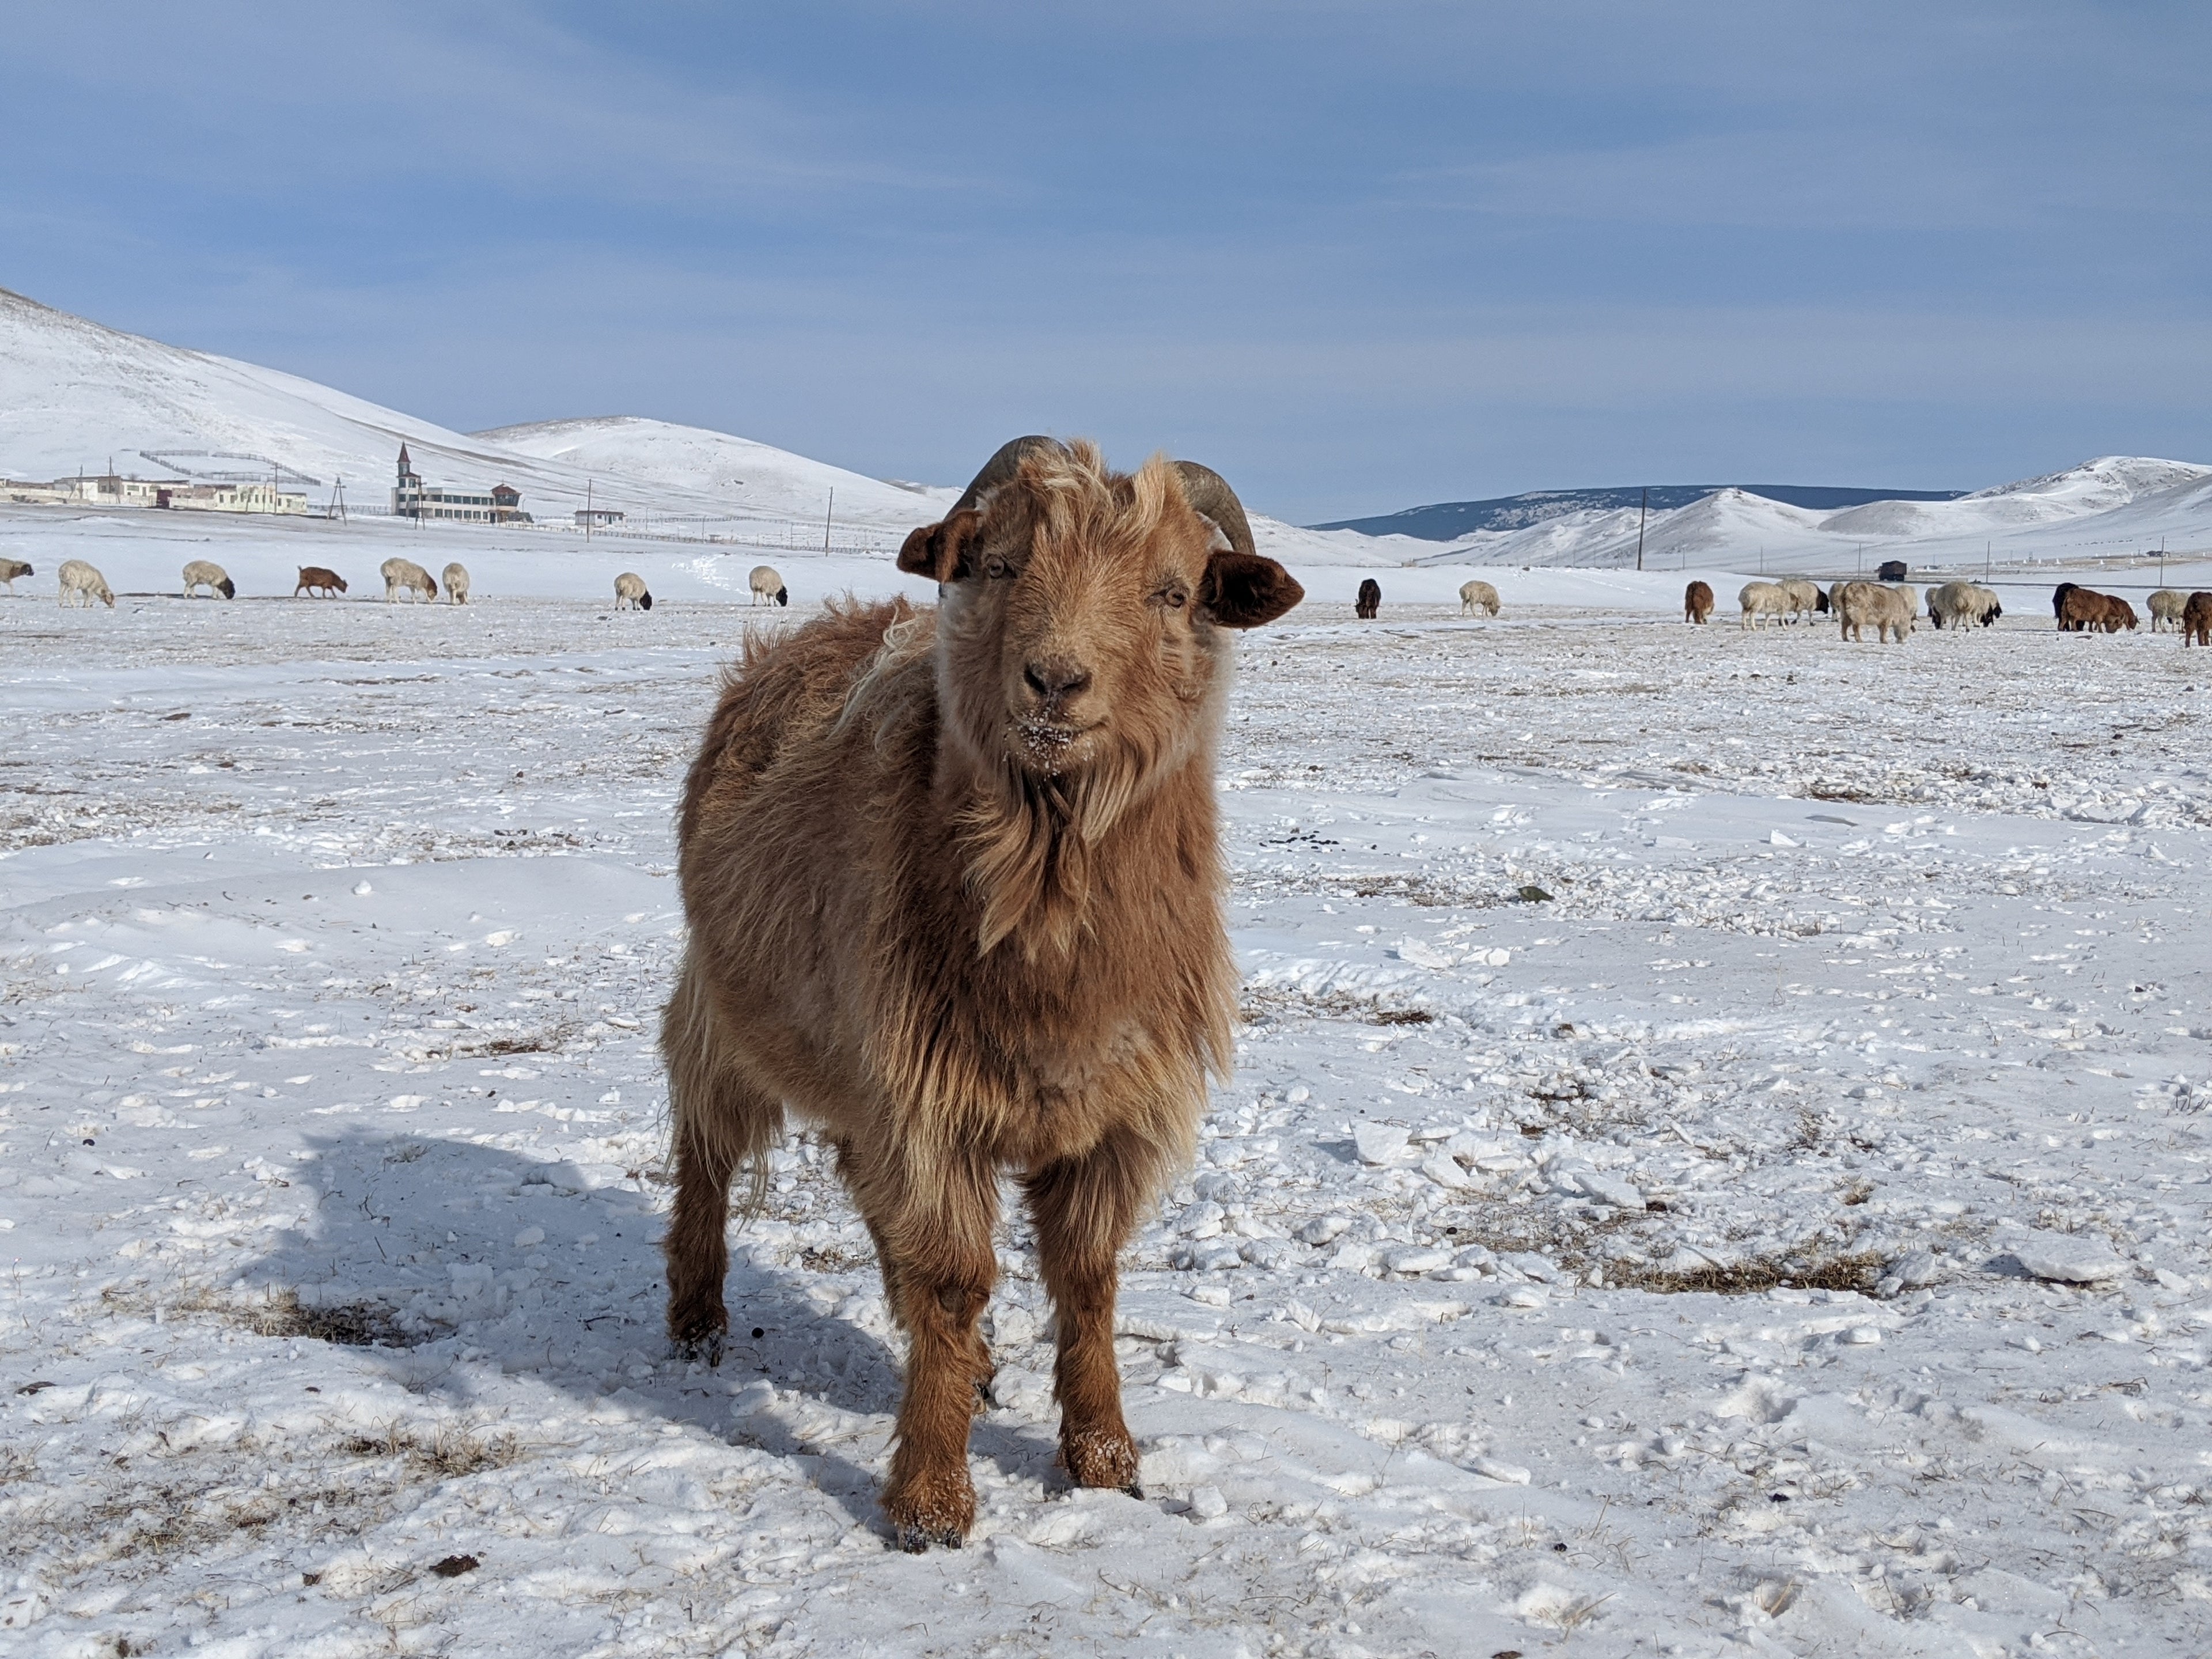 Mongolian cashmere goat in the winter